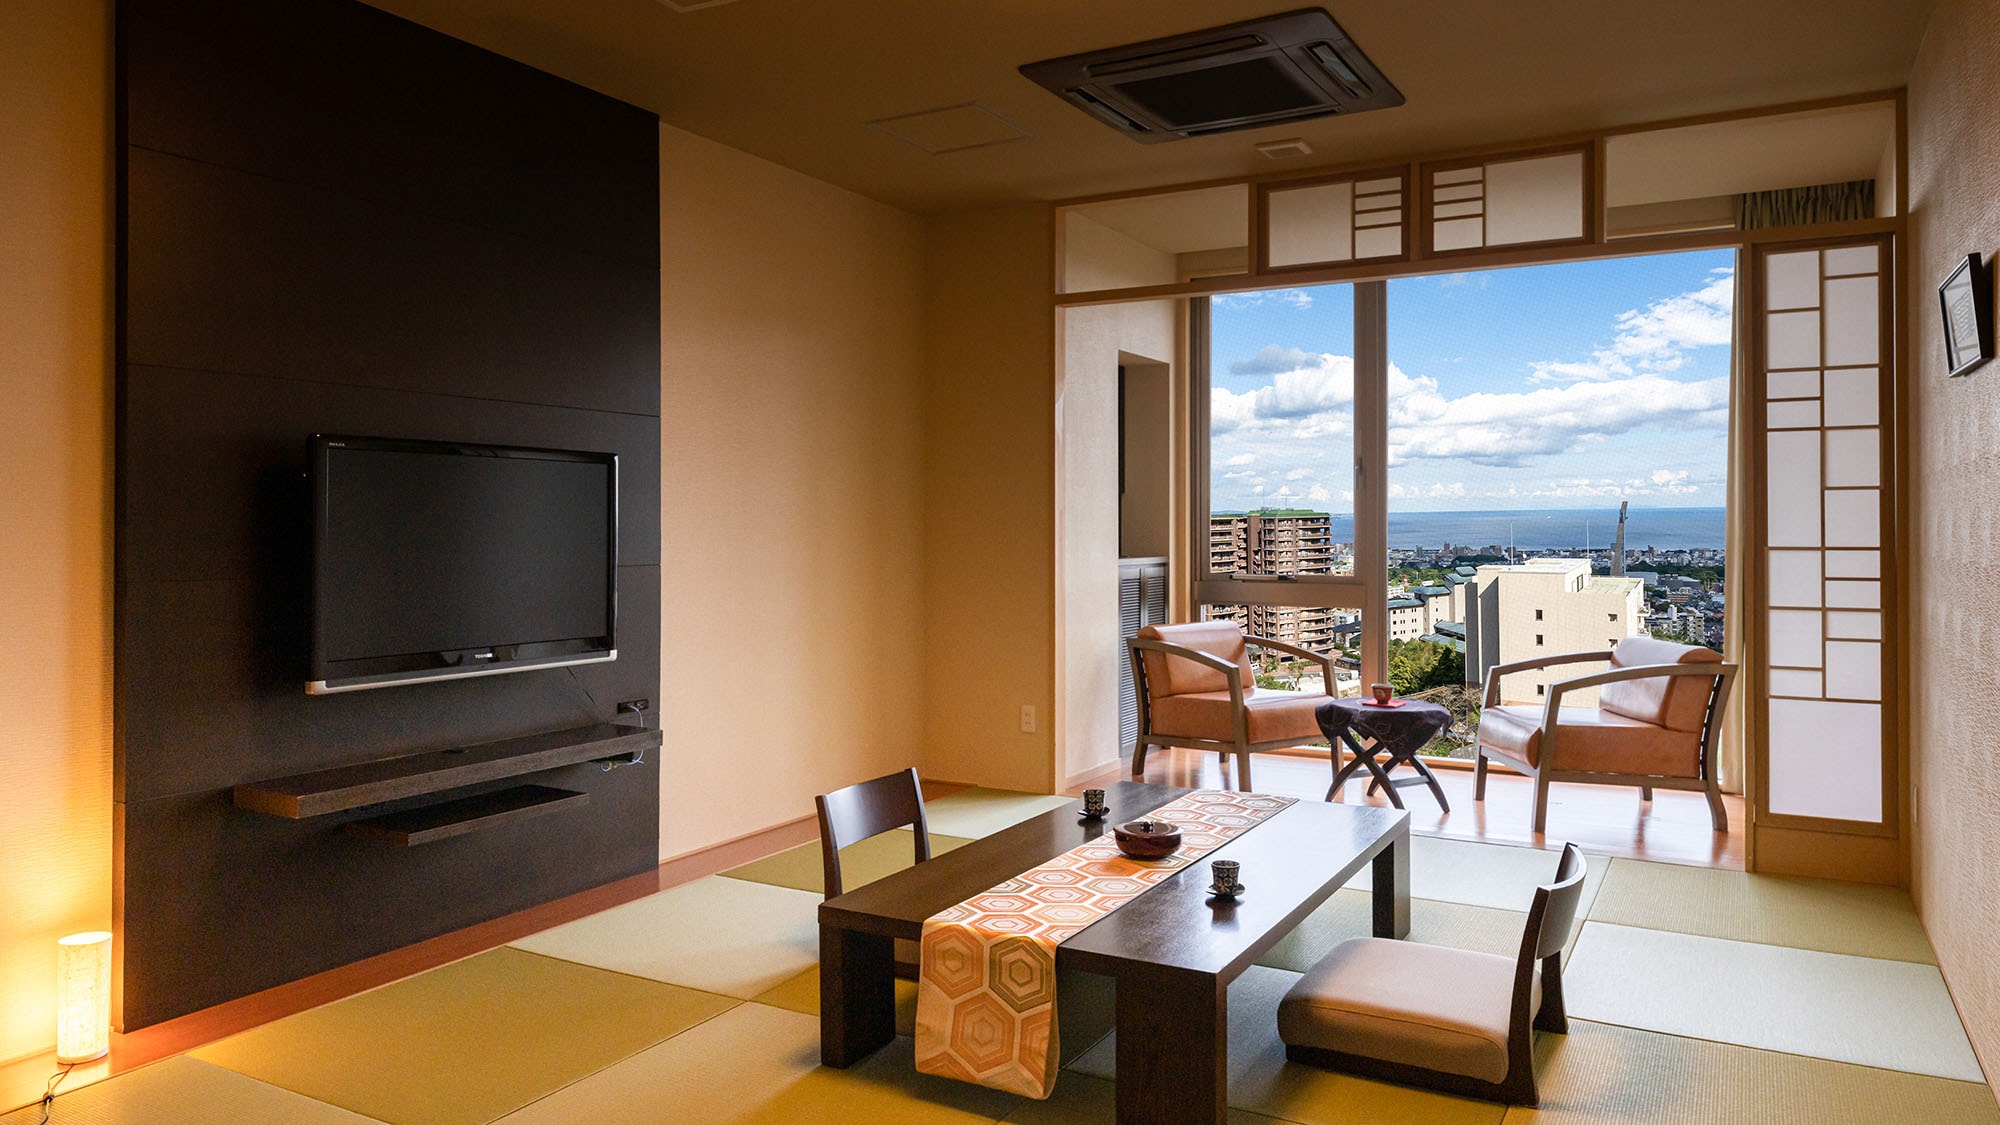 ◆ Tsukinoso ◆ Special Japanese-style room "Matsukaze" ◆ A room overlooking Beppu Bay and the cityscape of Beppu